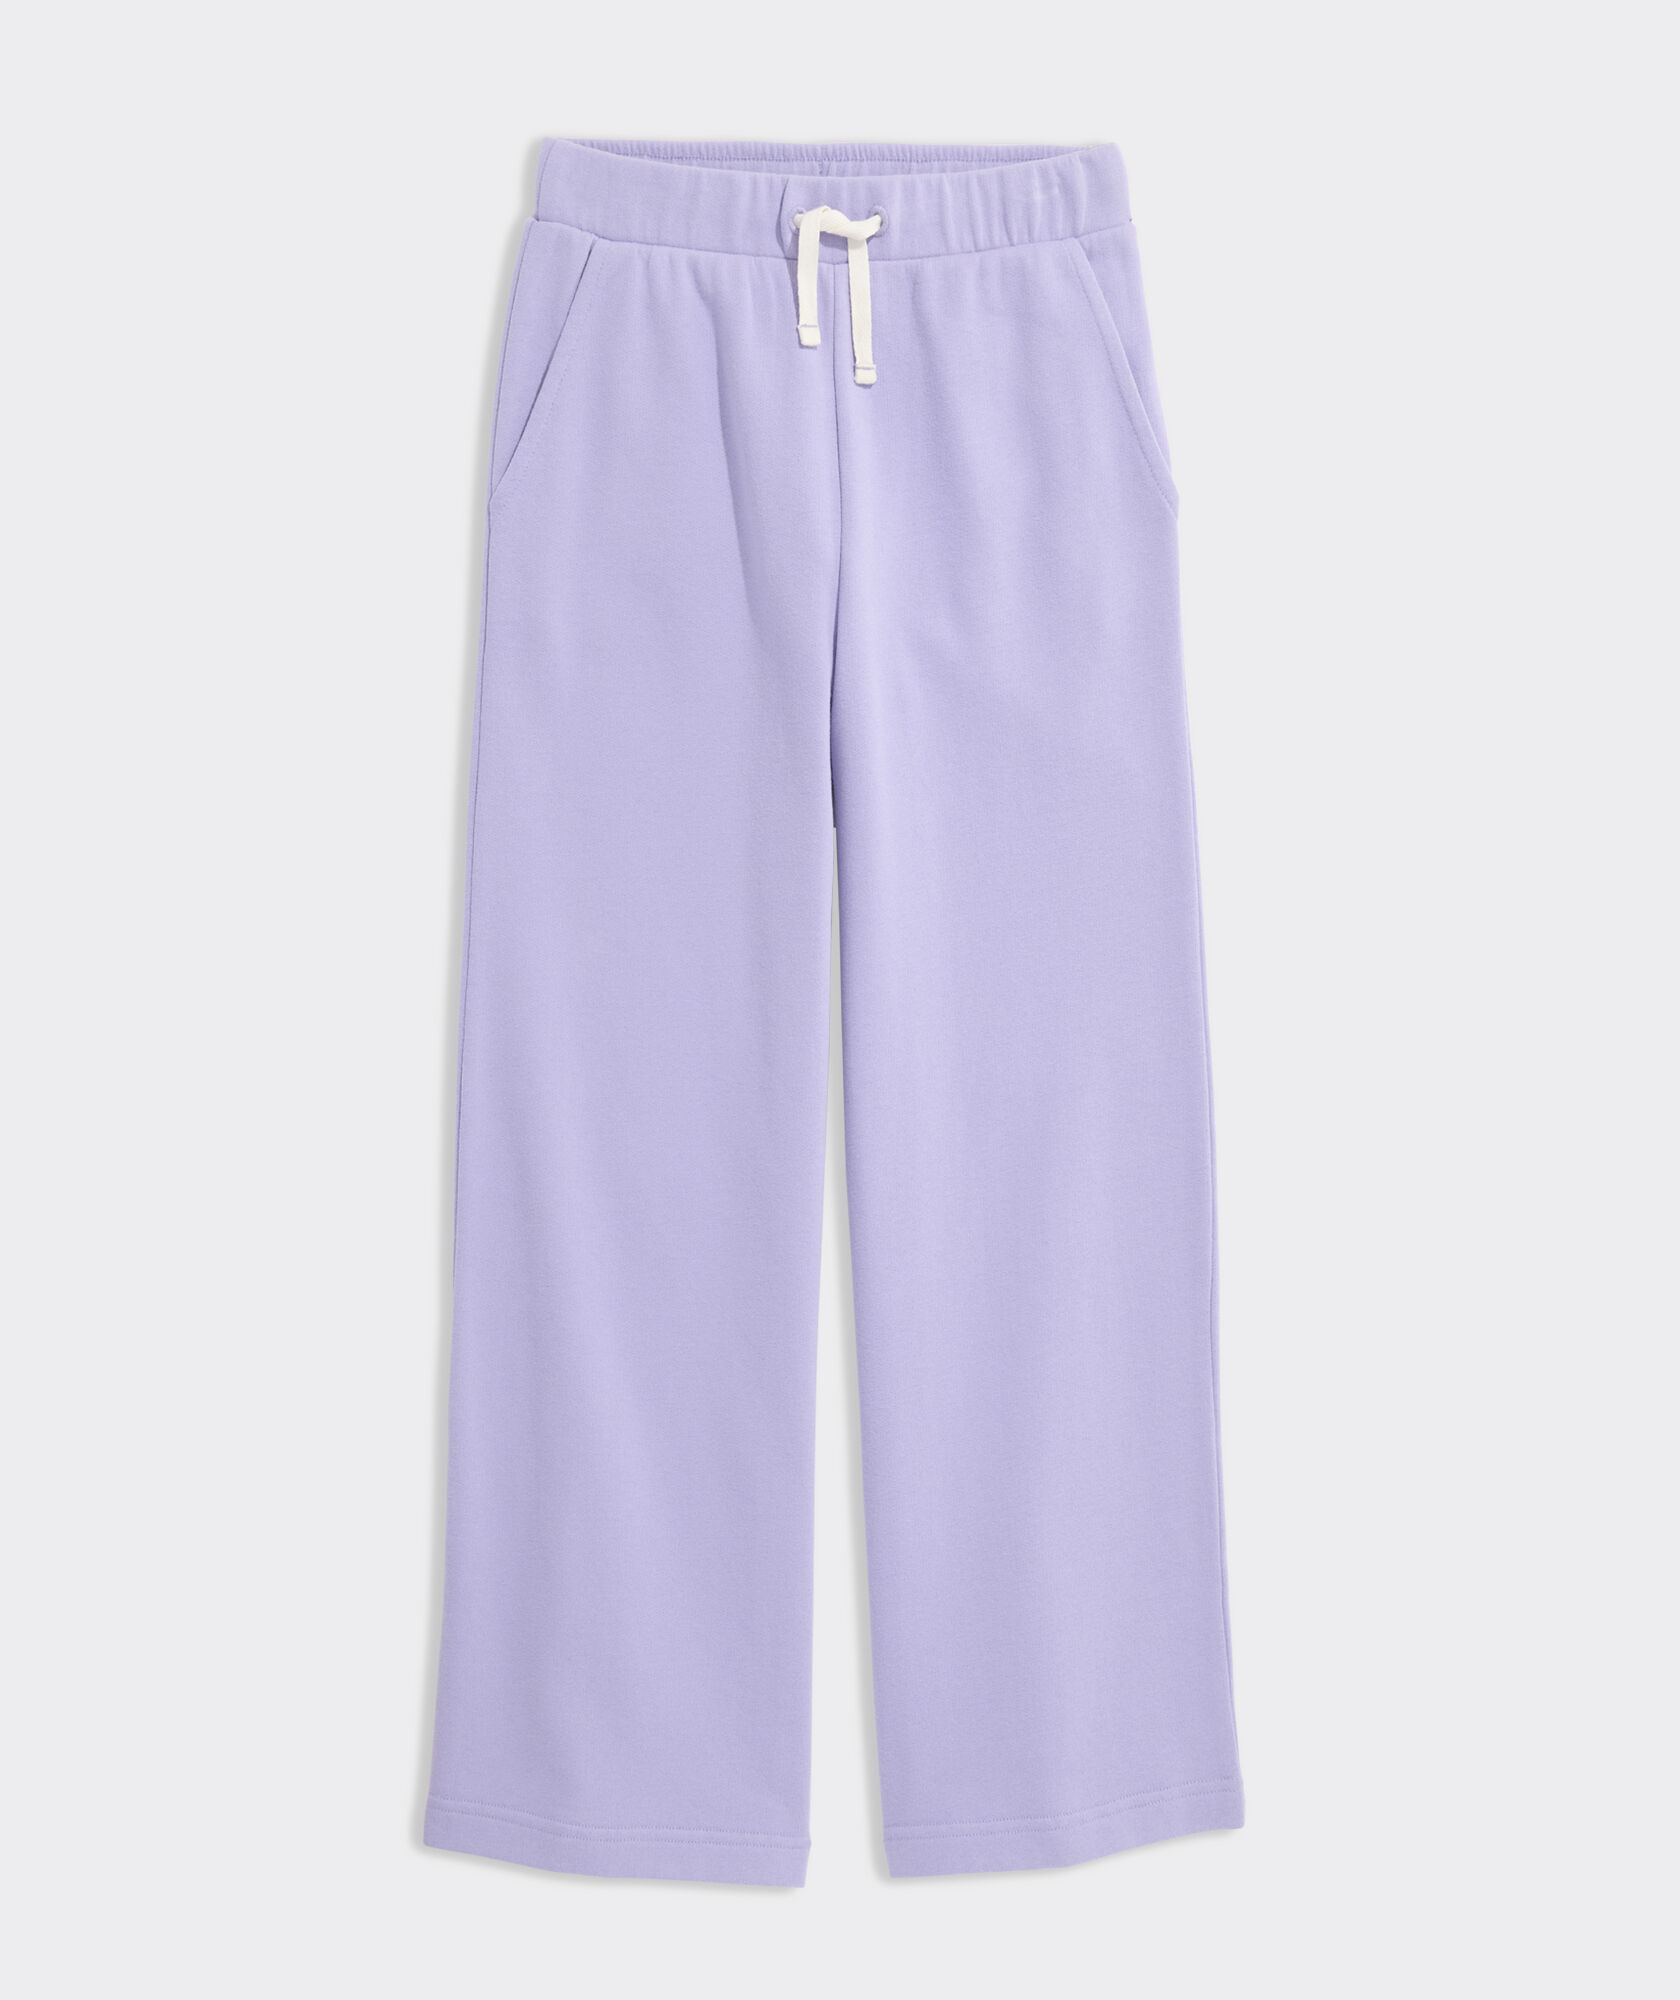 Girls' French Terry Wide Leg Sweatpants